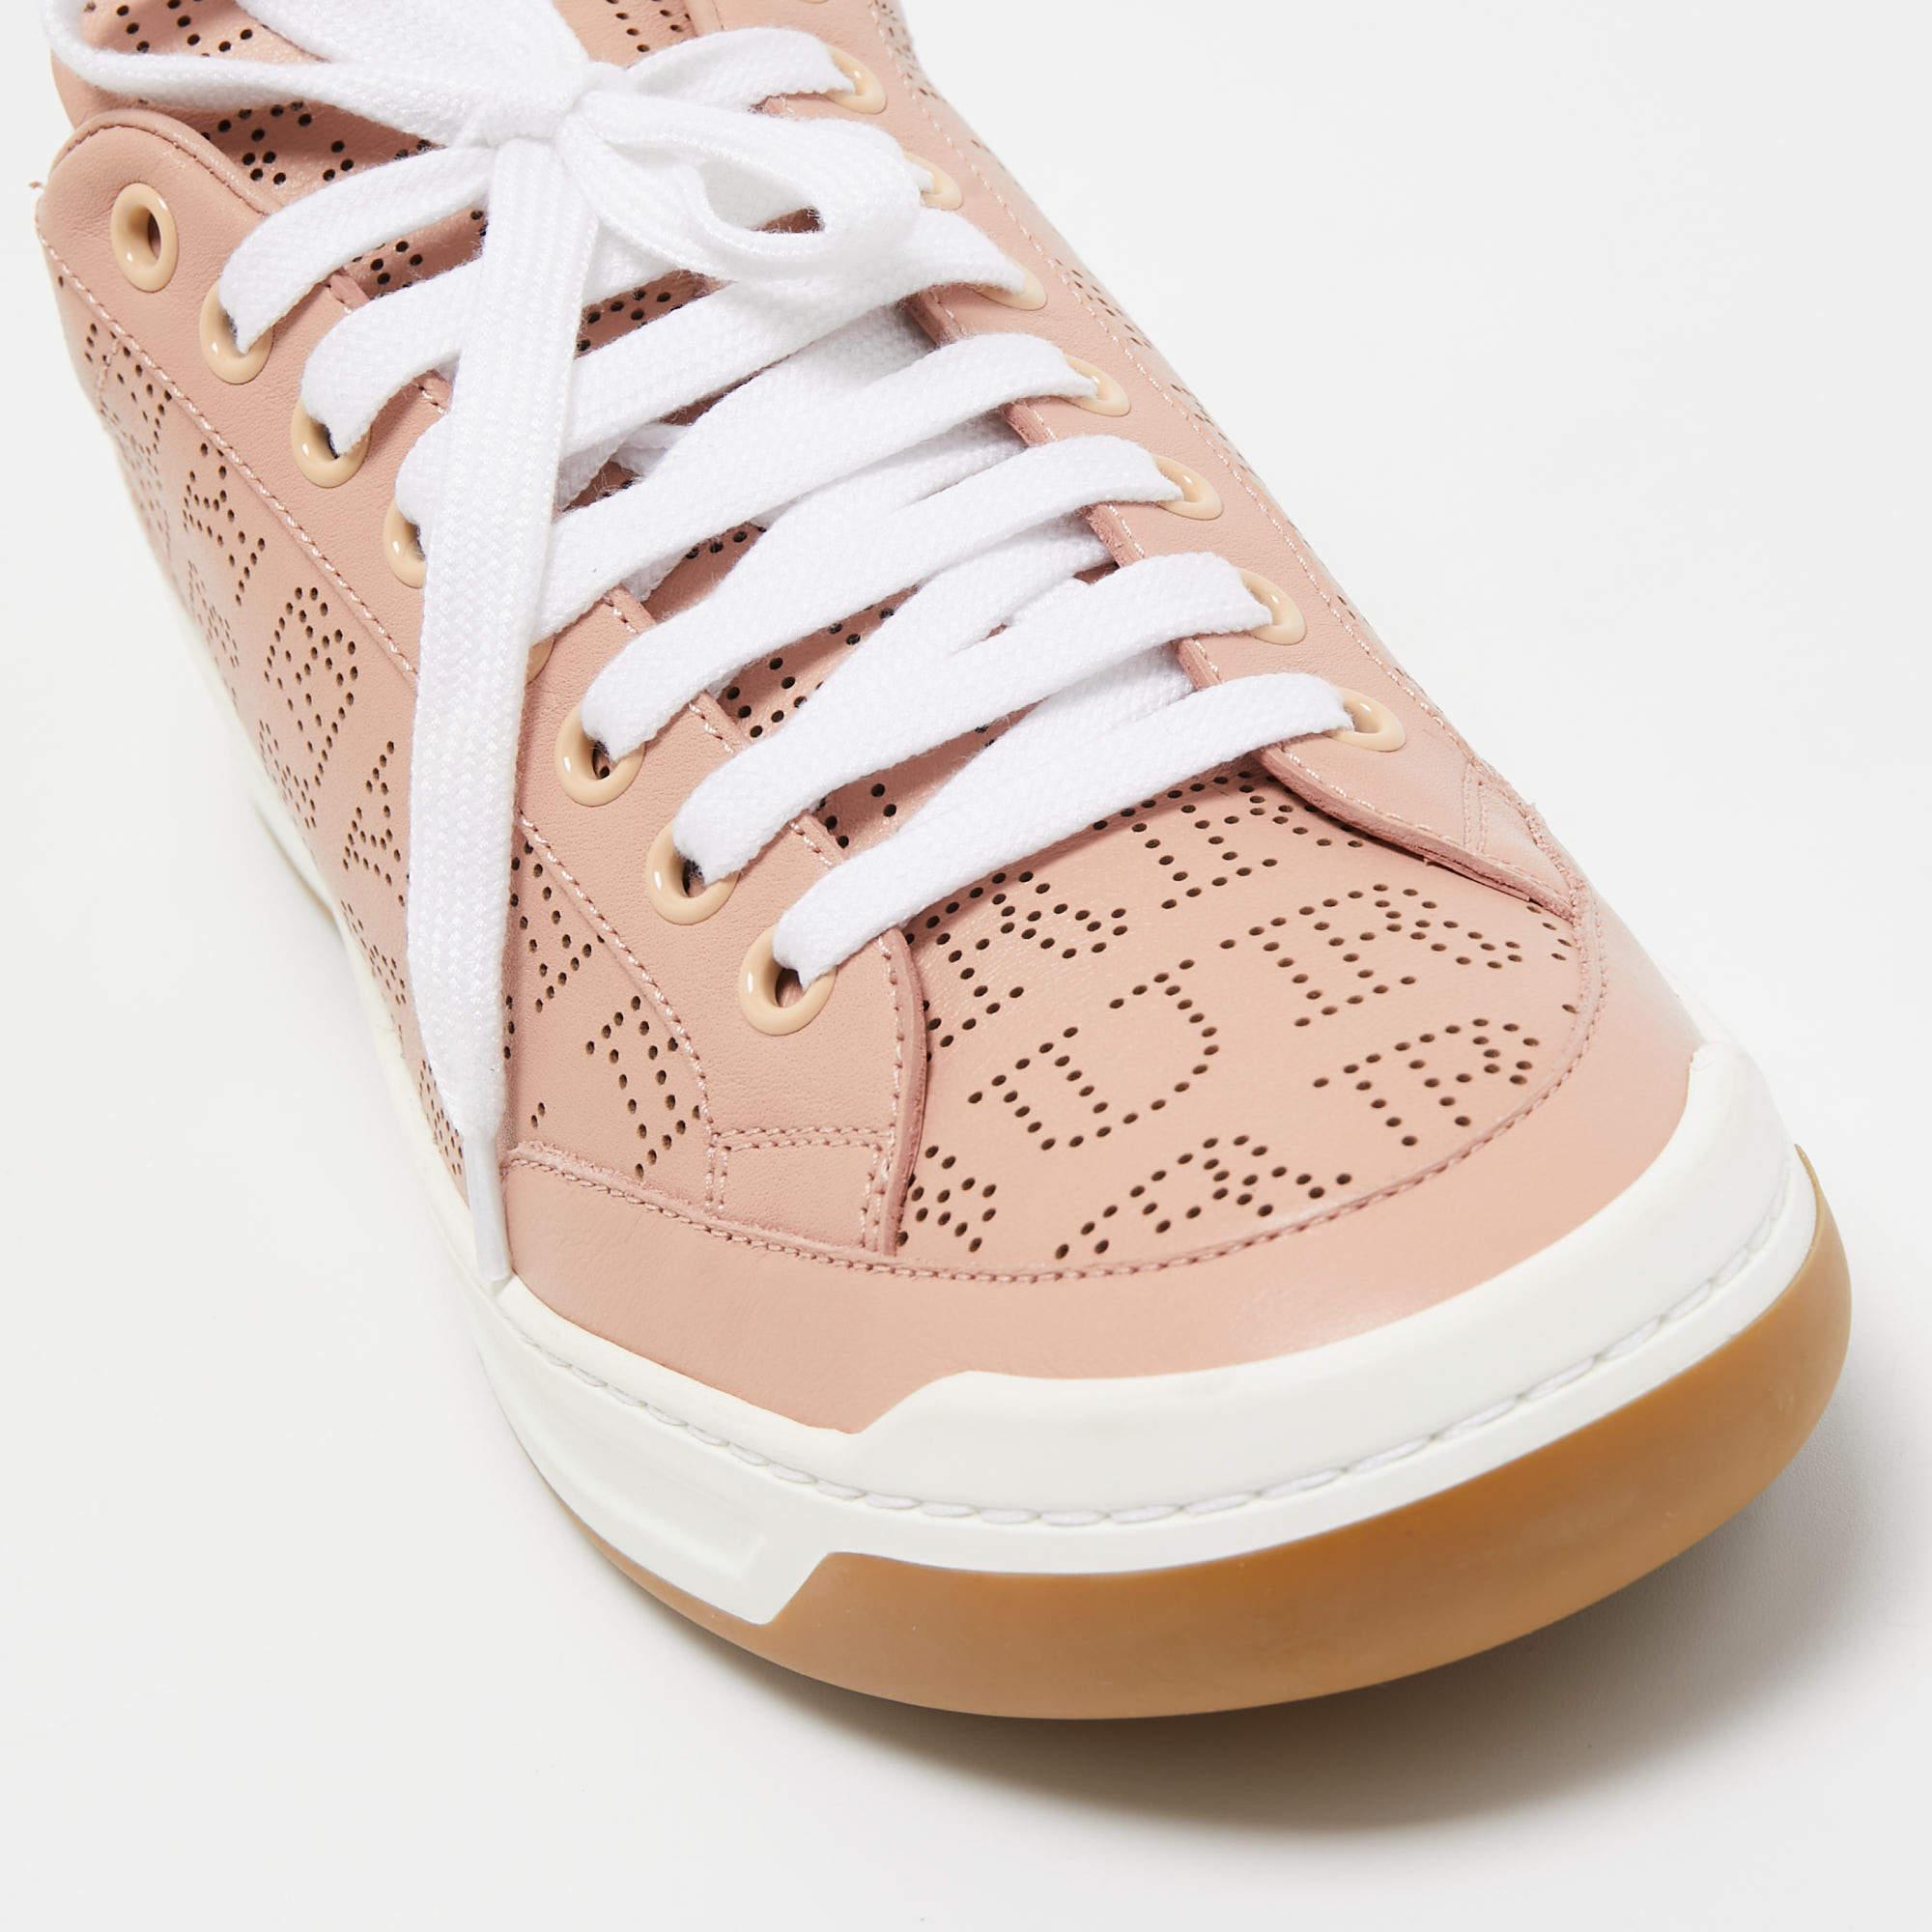 Baskets basses Westford roses Burberry, taille 41 2